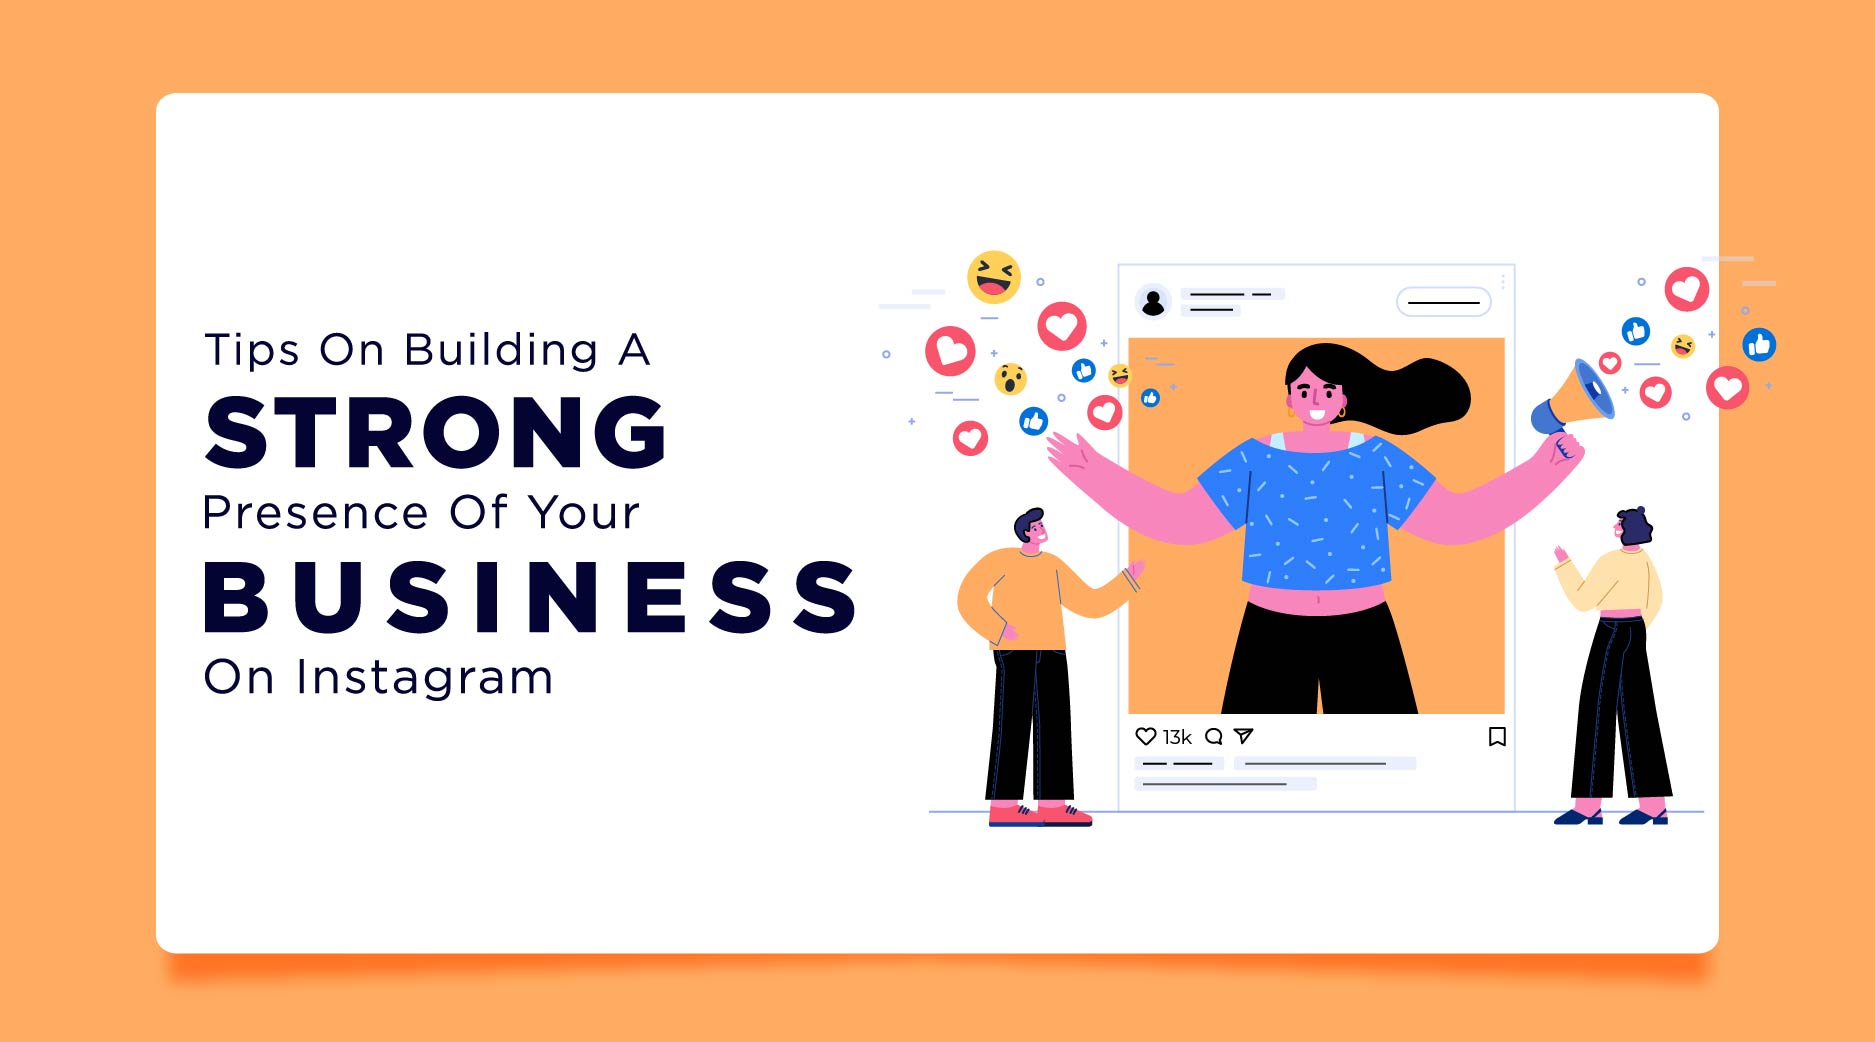 7 Tips on Building a Strong Presence of your Business on Instagram